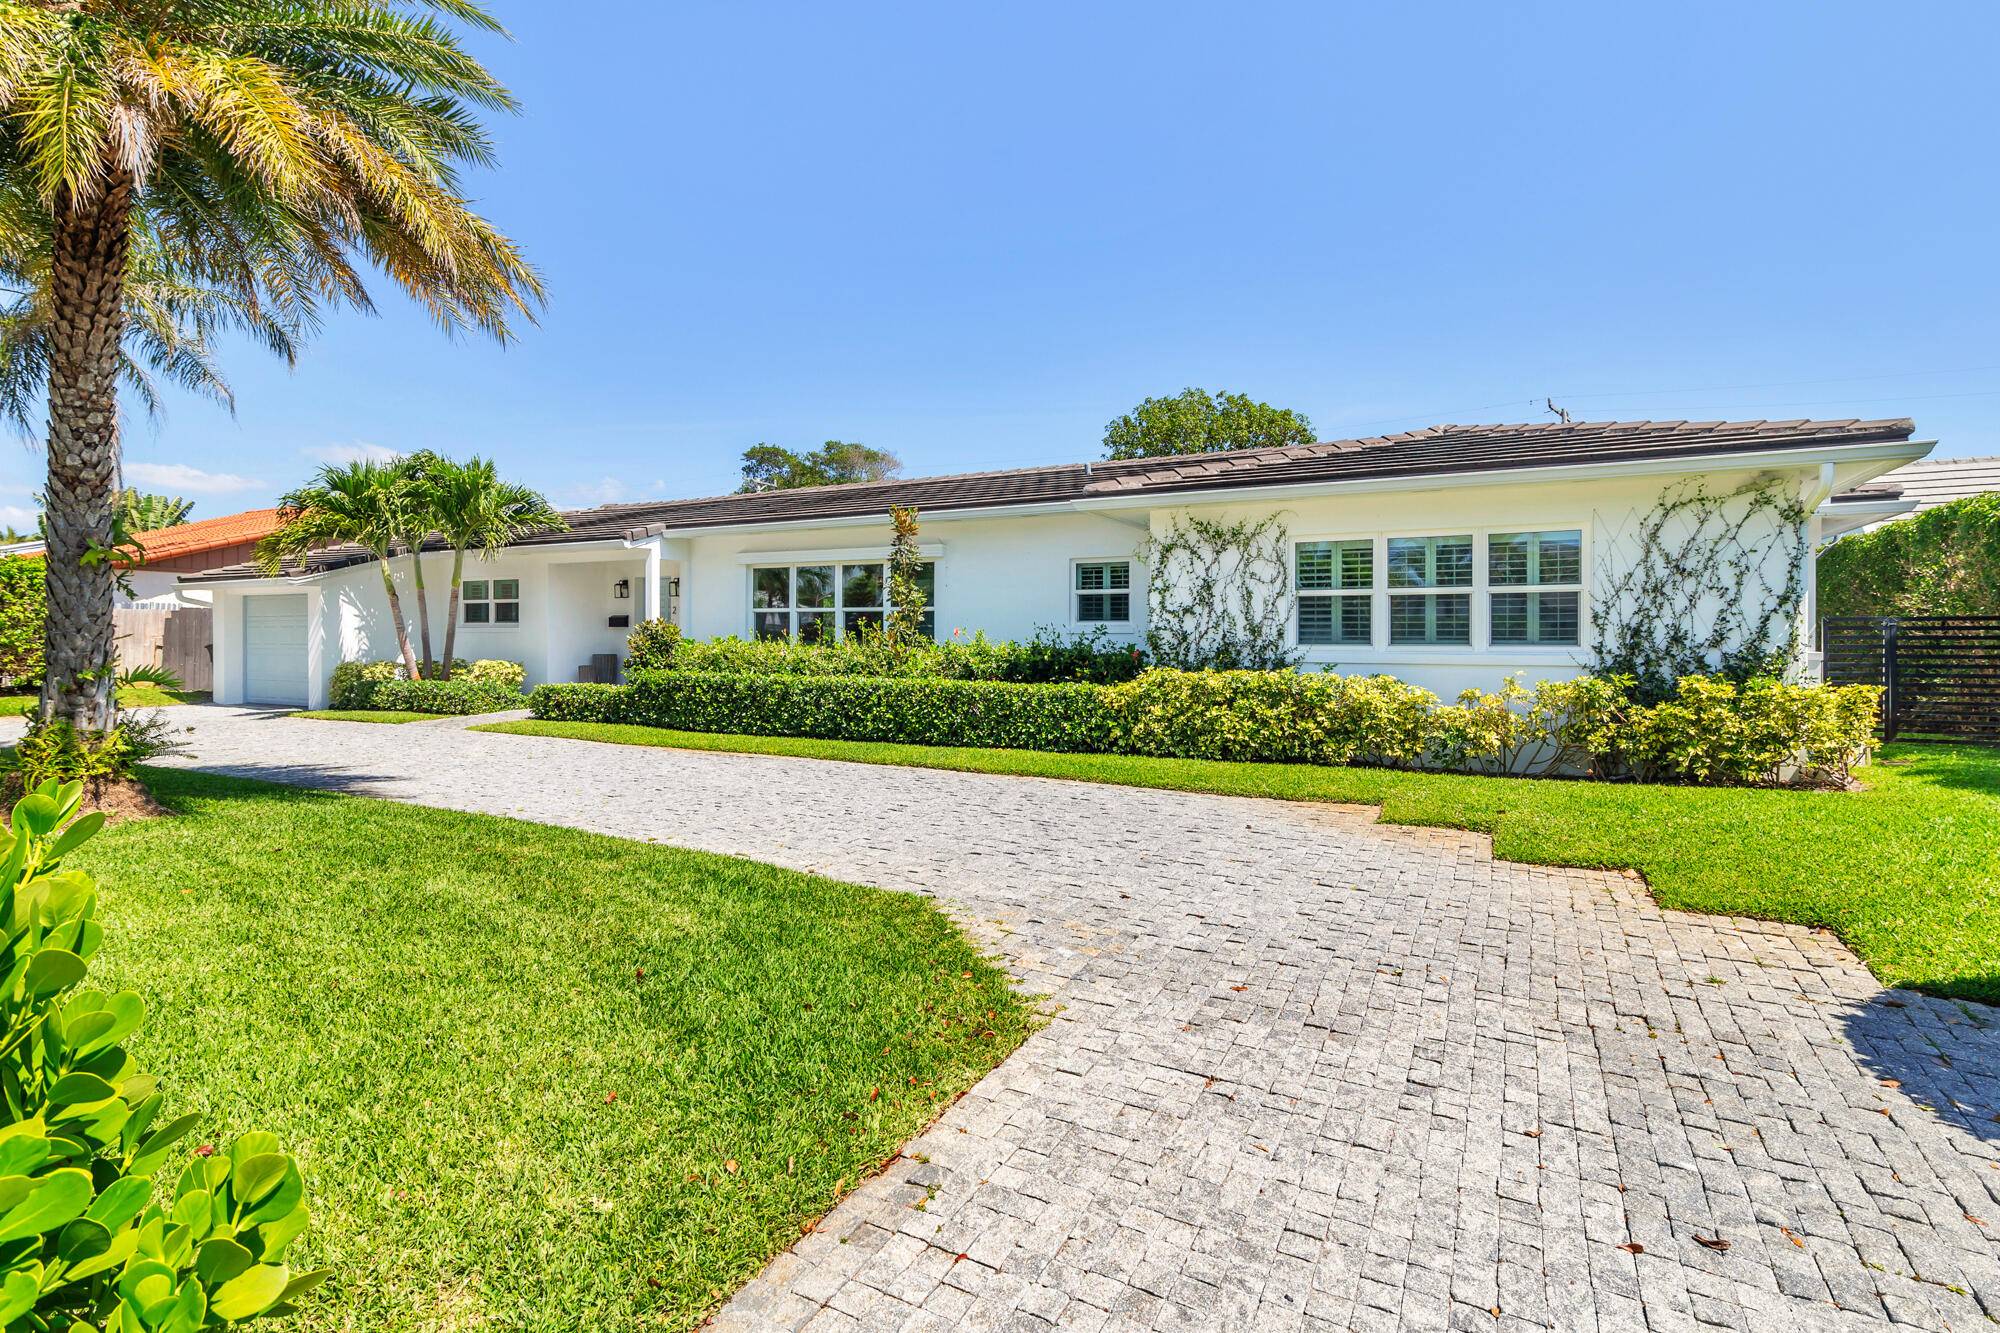 Nestled in the sought after SoSo neighborhood of West Palm Beach, this 3 bedroom 3 bathroom home, renovated by Caroline Rafferty Interiors, offers a spacious layout.